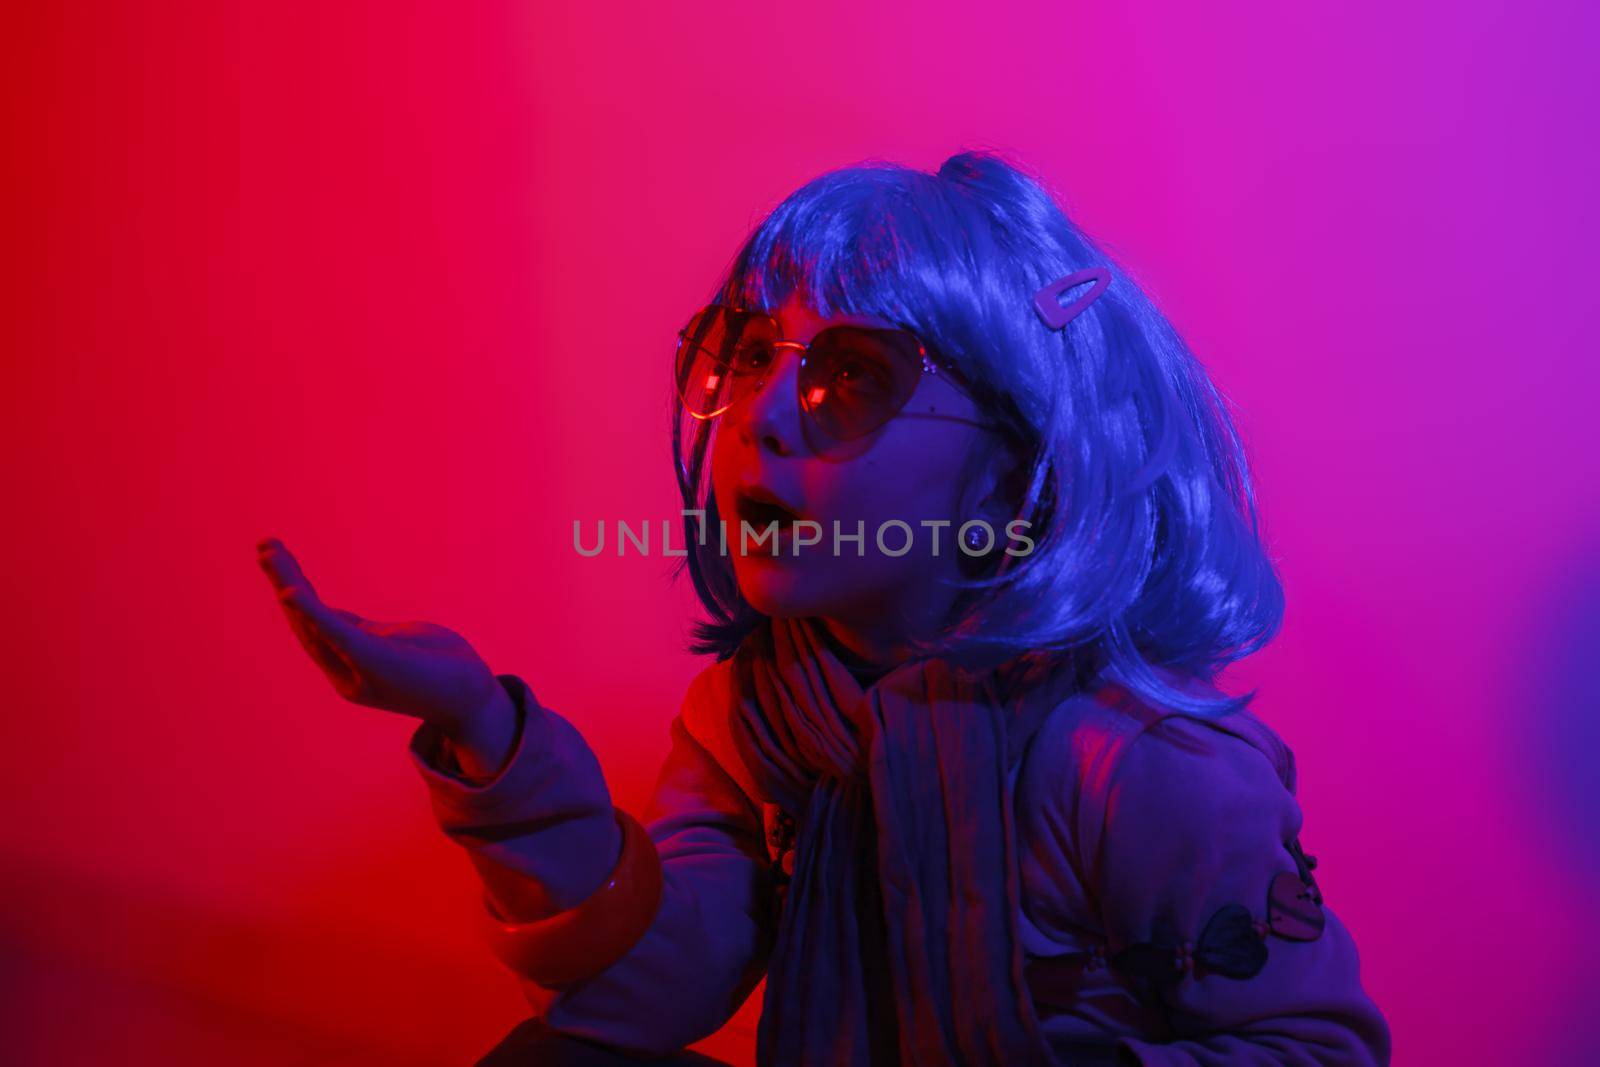 Little girl blowing kiss wearing a colorful wig and heart-shaped sunglasses posed for a photo shooting on the disco light background